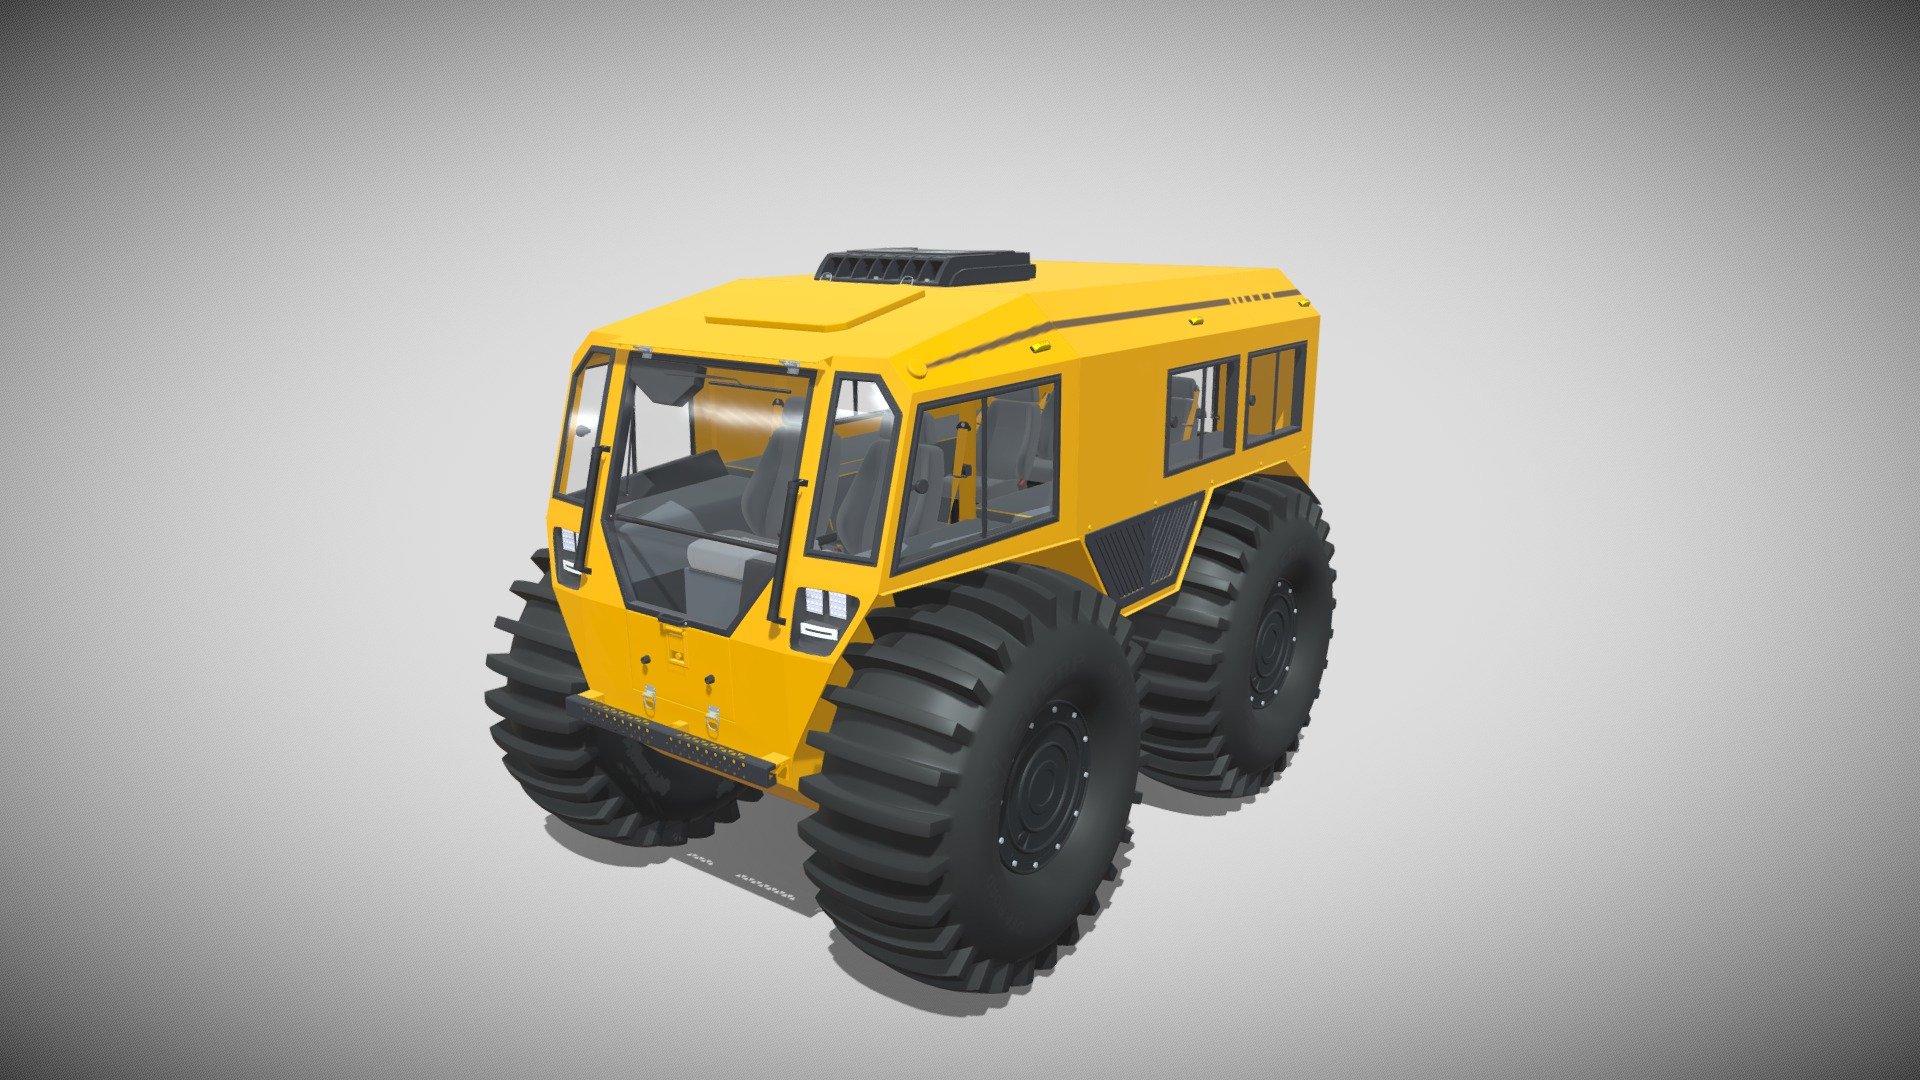 Detailed model of a Sherp N 1200 2021, modeled in Cinema 4D.The model was created using approximate real world dimensions.

The model includes a detailed interior but does not include the engine of the ATV.

The model has 808,865 polys and 817,909 vertices.

An additional file has been provided containing the original Cinema 4D project file, textures and other 3d export files such as 3ds, fbx and obj 3d model